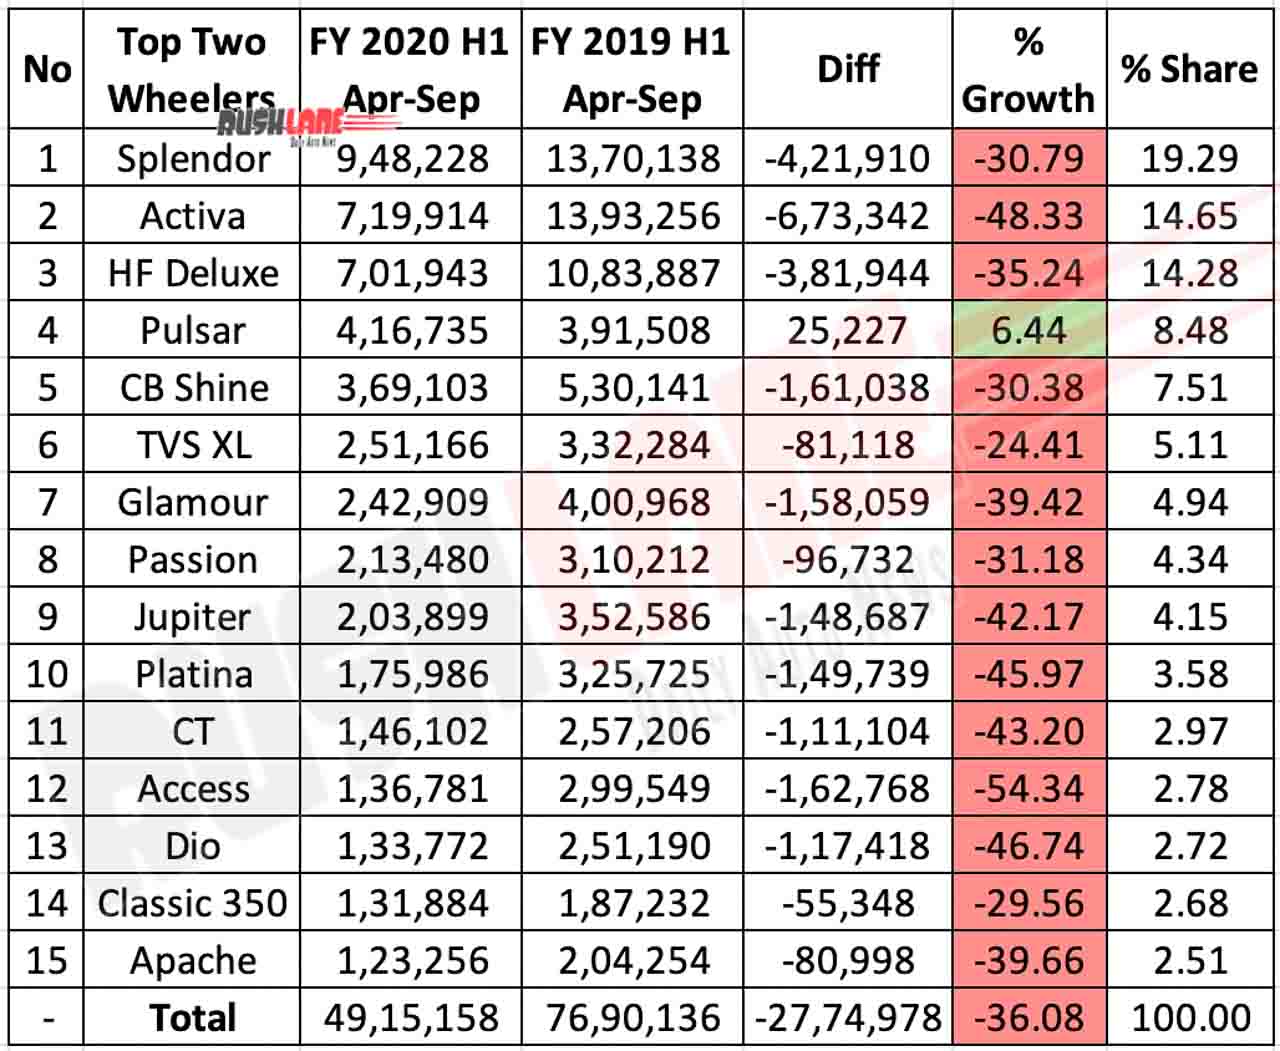 Top 15 Two Wheelers H1 FY 2020